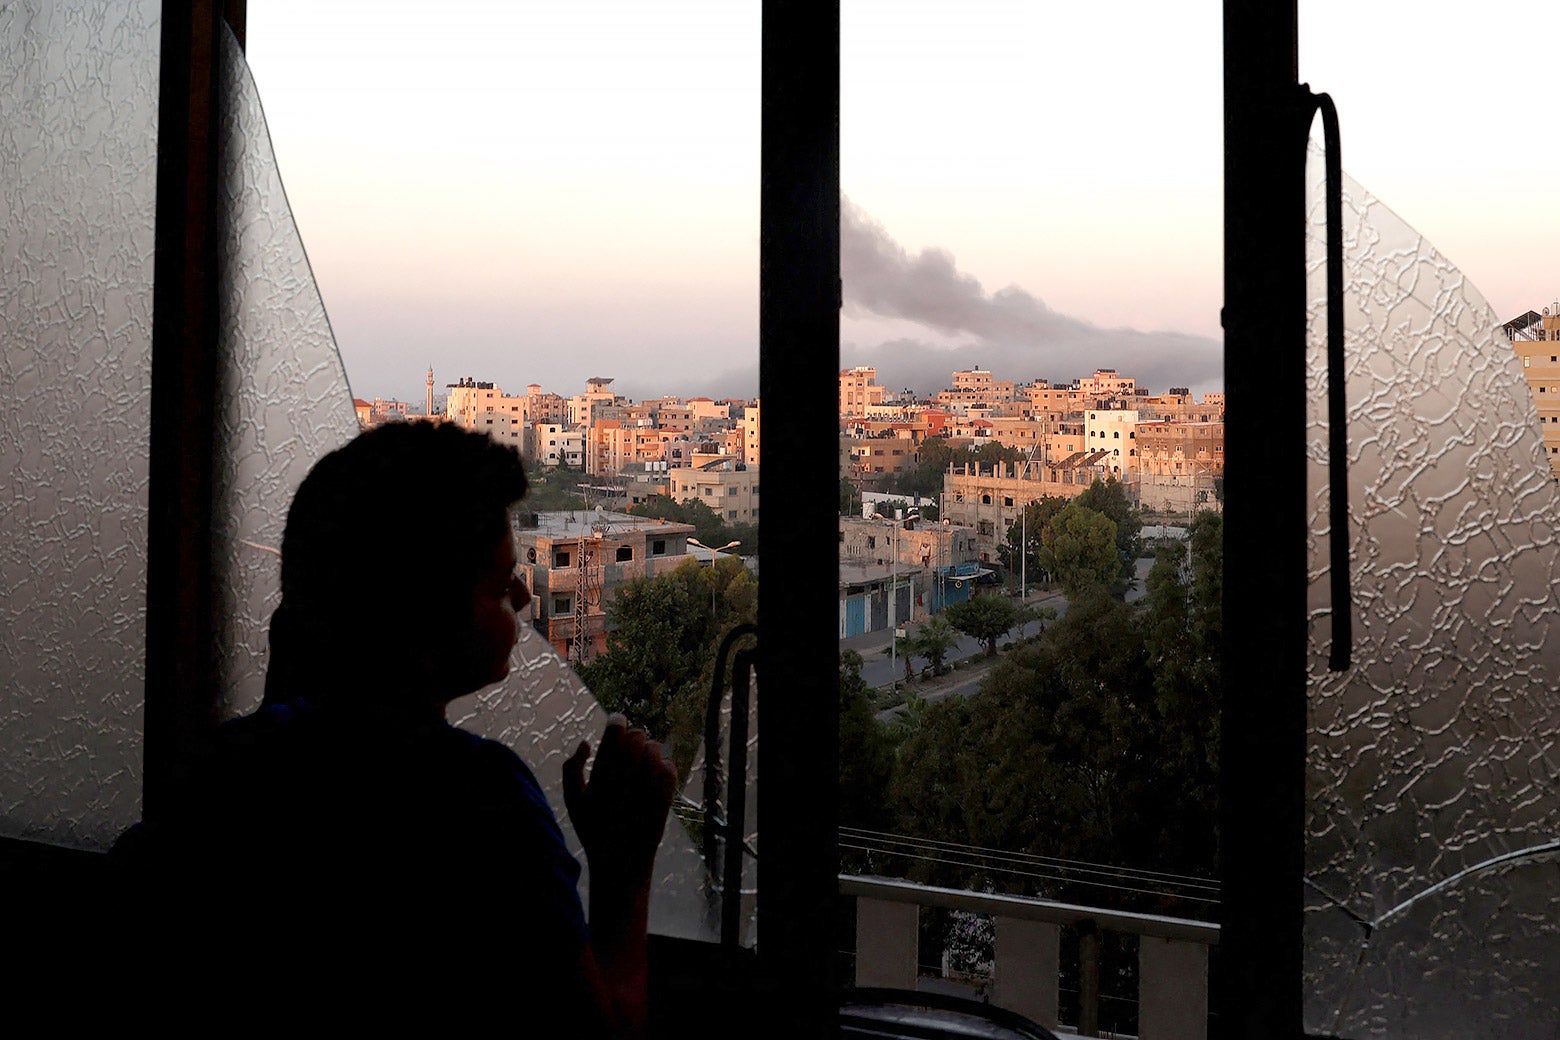 A child looks out a broken window at smoke billowing behind the buildings in the distance.